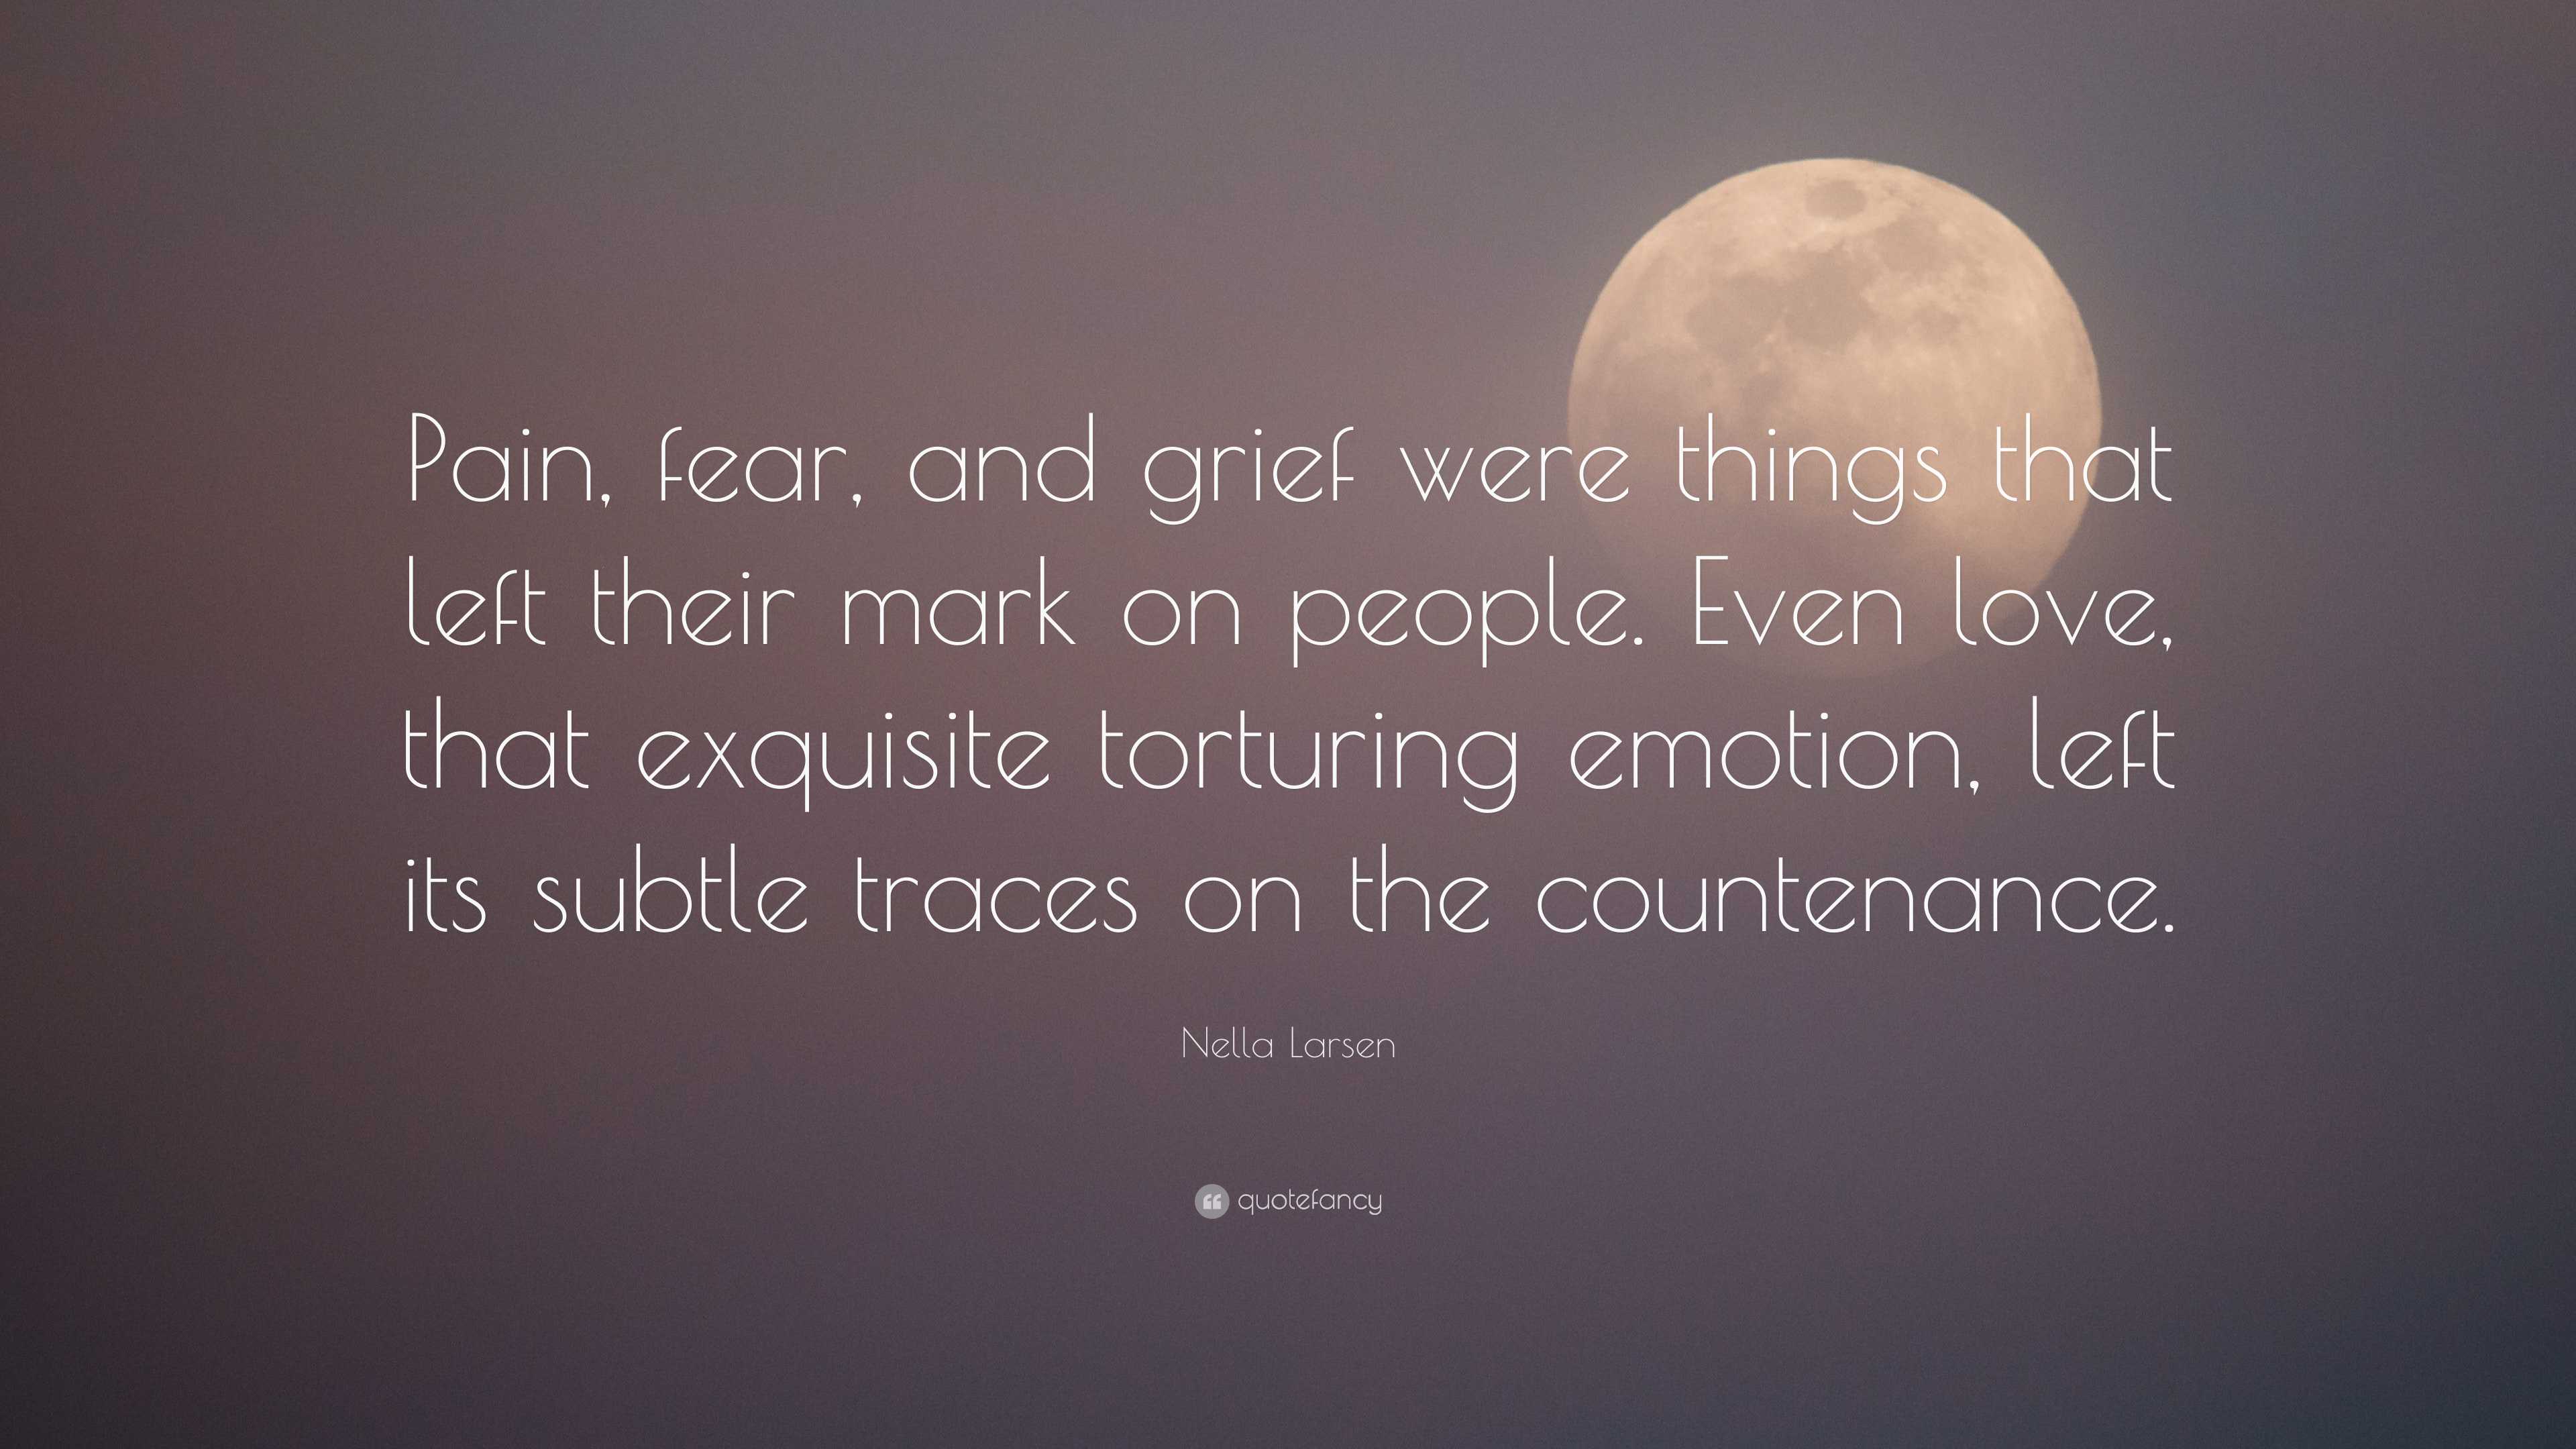 Nella Larsen Quote: “Pain, fear, and grief were things that left their ...